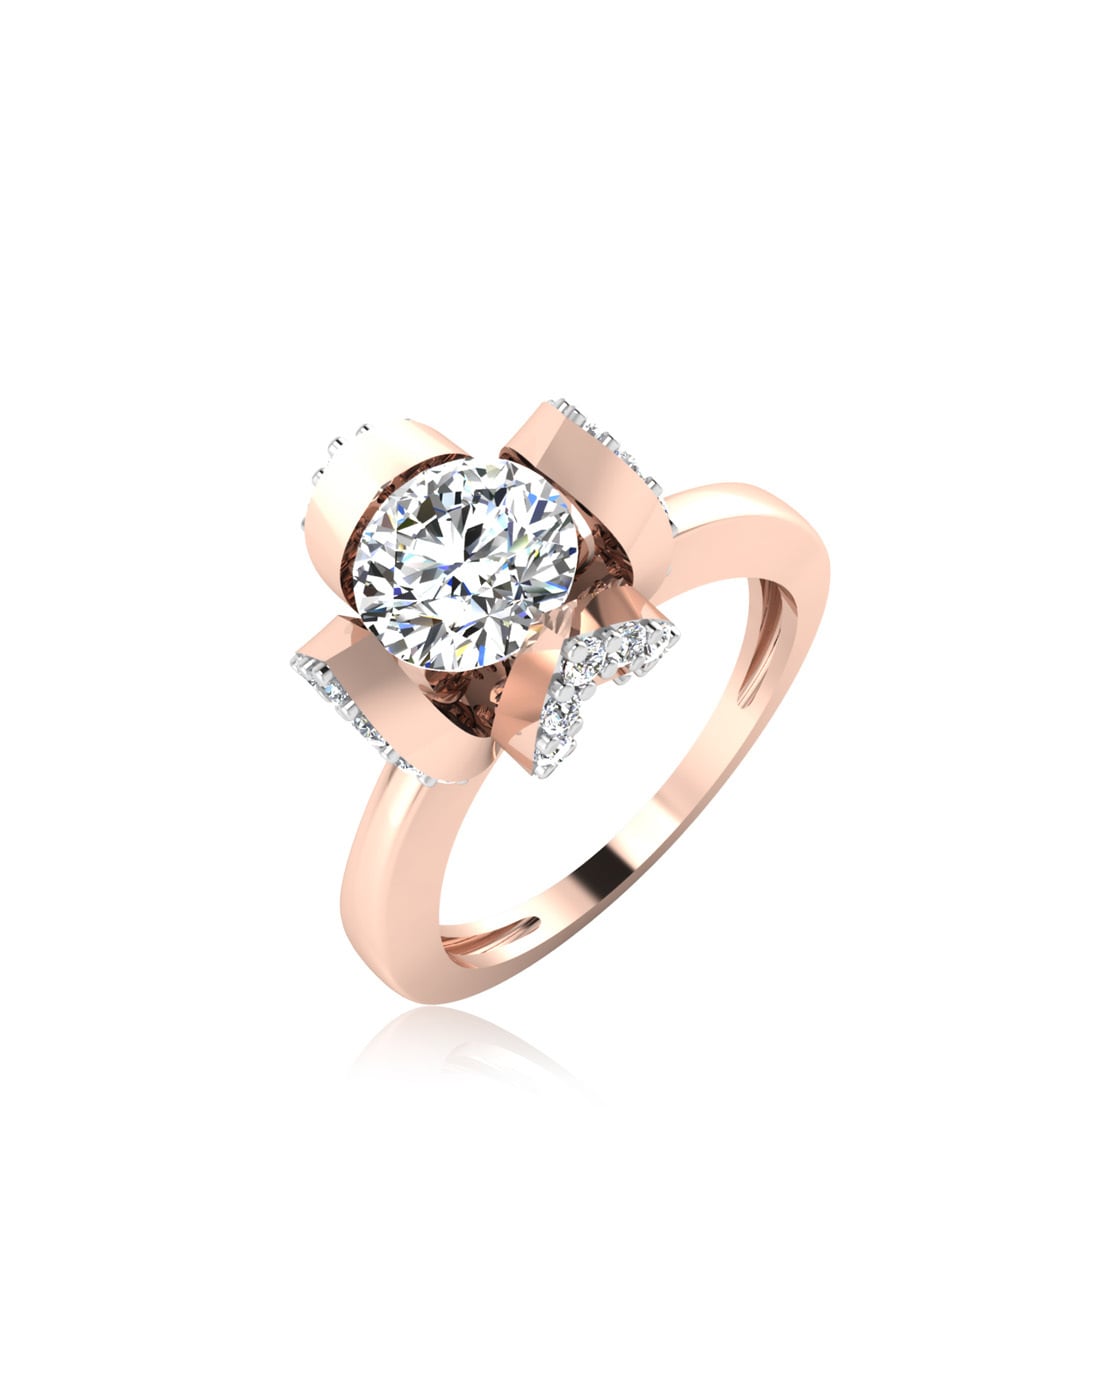 Diamond Floral Engagement Ring, Rose Flower Solitaire Wedding Ring, Unique  1.01 Carat GIA Certified 18K Rose Gold or Yellow Gold Handmade